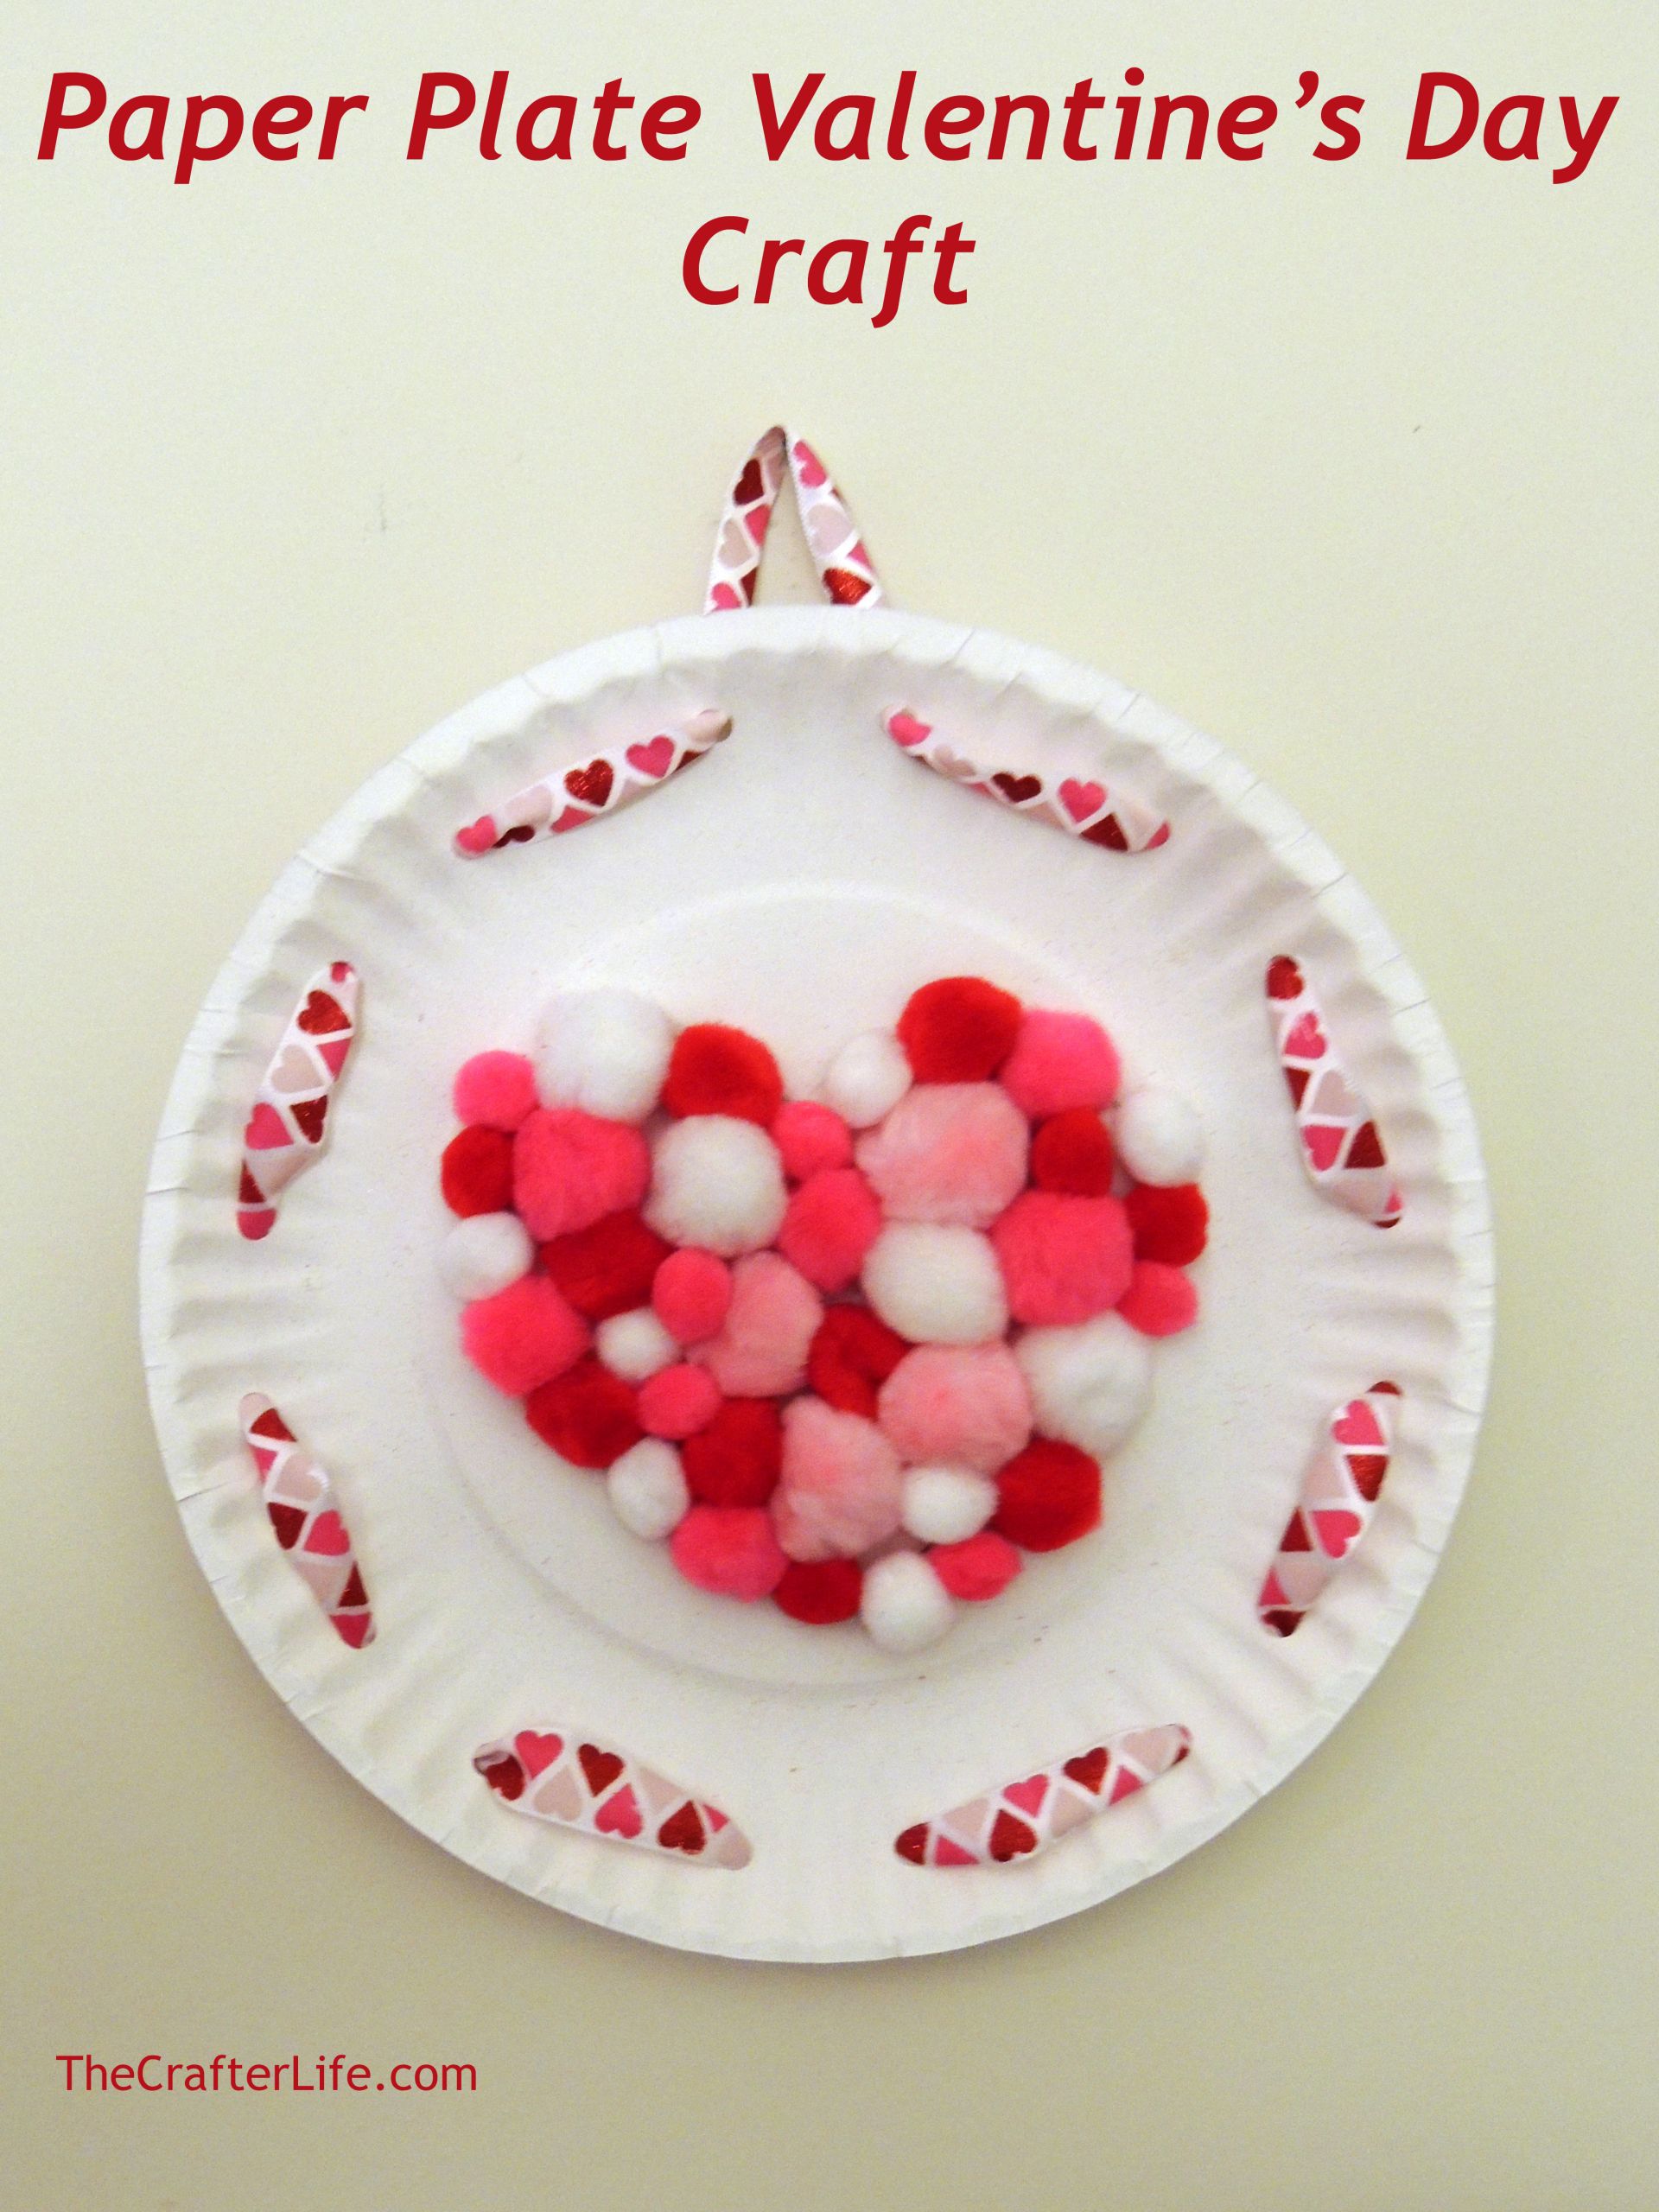 Valentines Day Paper Craft
 Paper Plate Valentine’s Day Craft – The Crafter Life